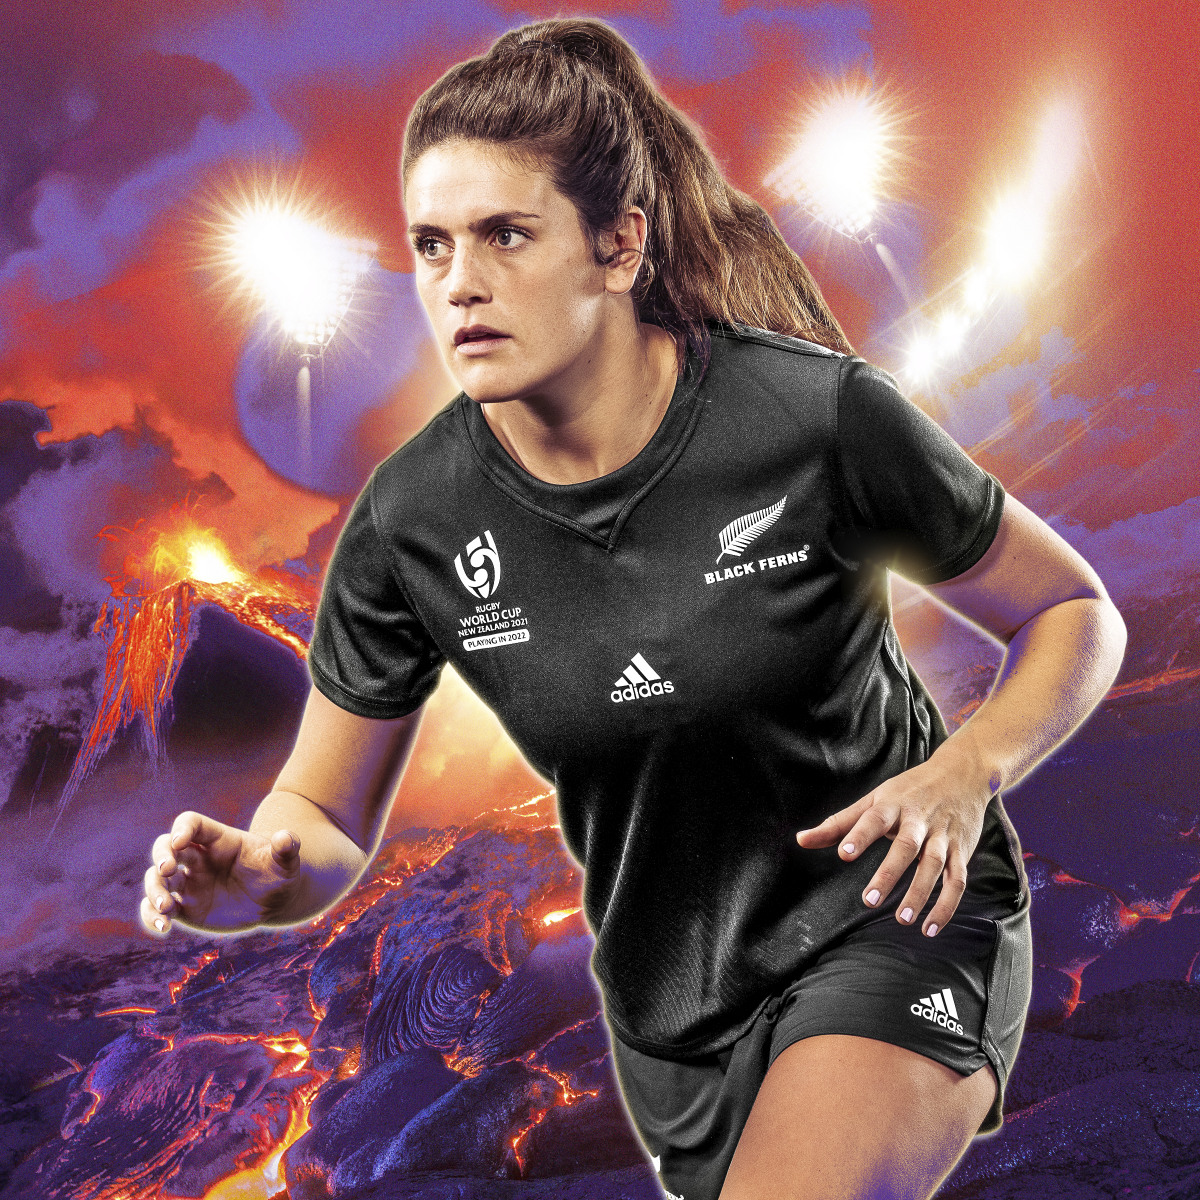 Adidas Black Ferns Rugby World Cup Home Jersey. 4